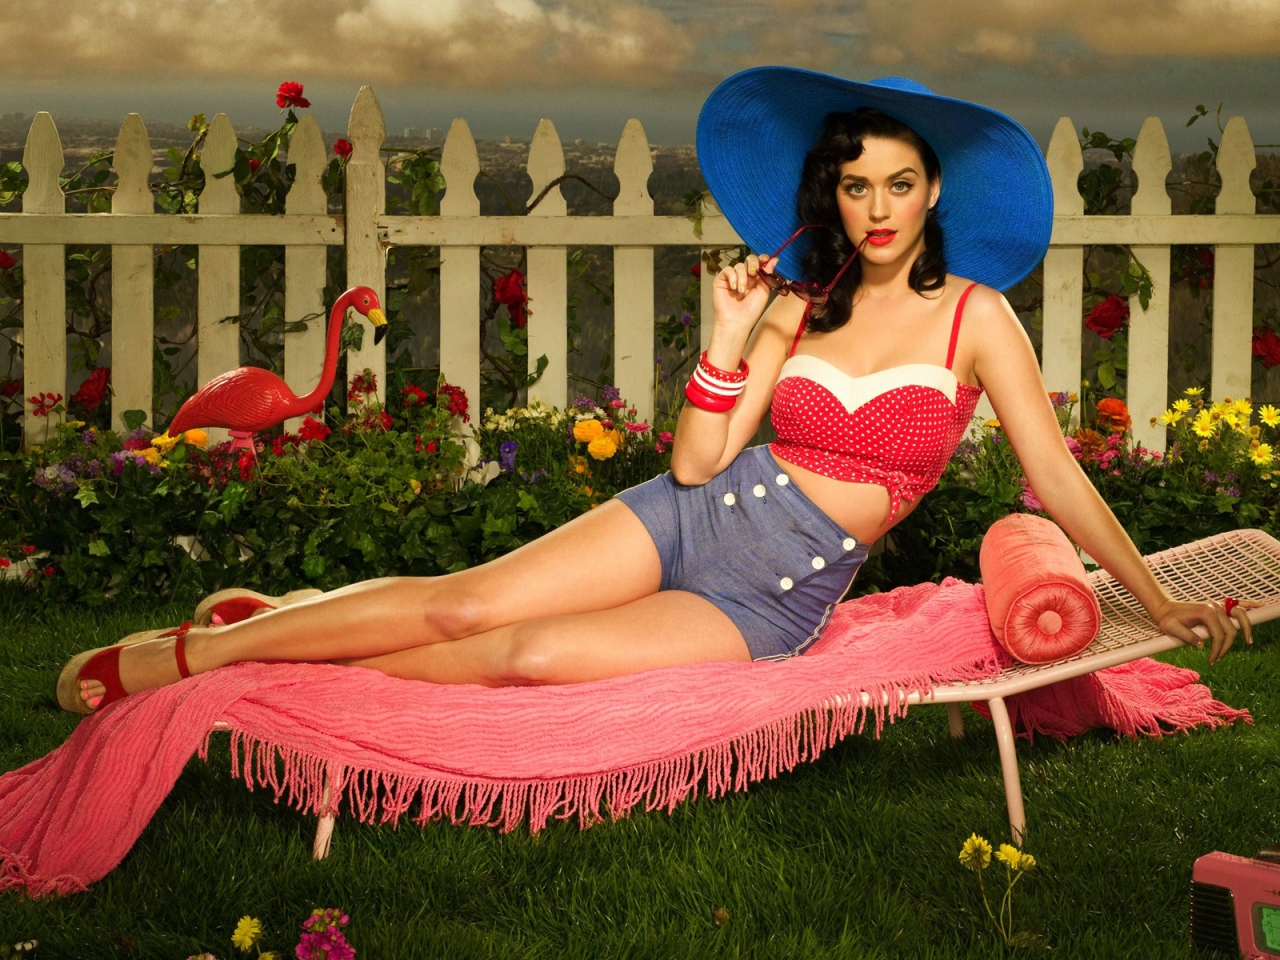 Katy Perry on The Chair for 1280 x 960 resolution